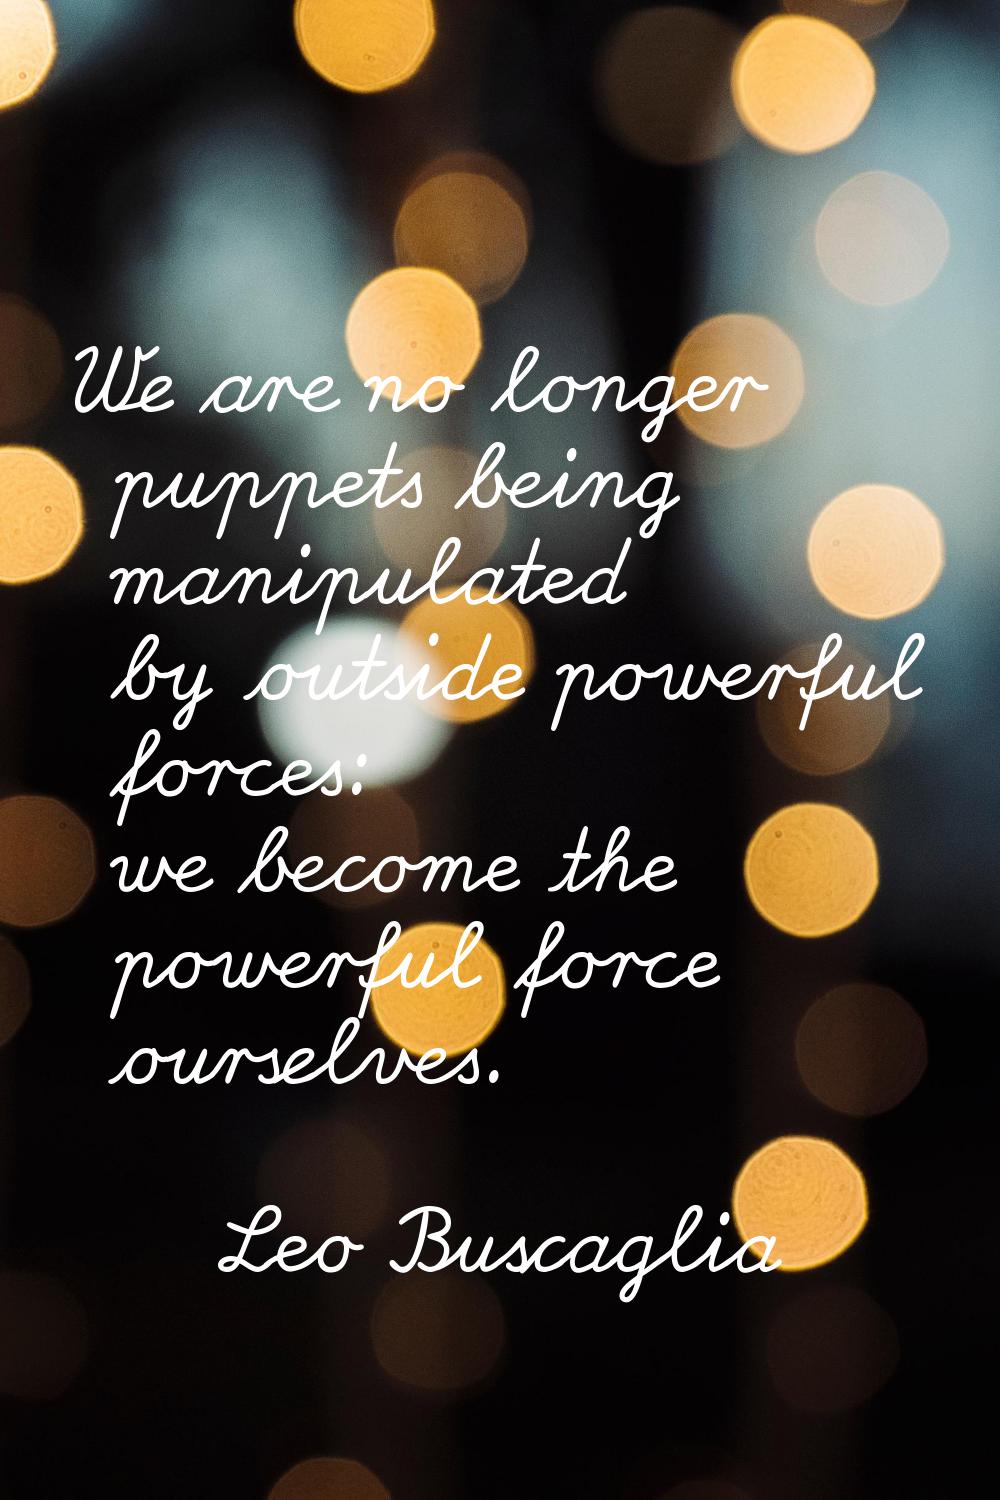 We are no longer puppets being manipulated by outside powerful forces: we become the powerful force